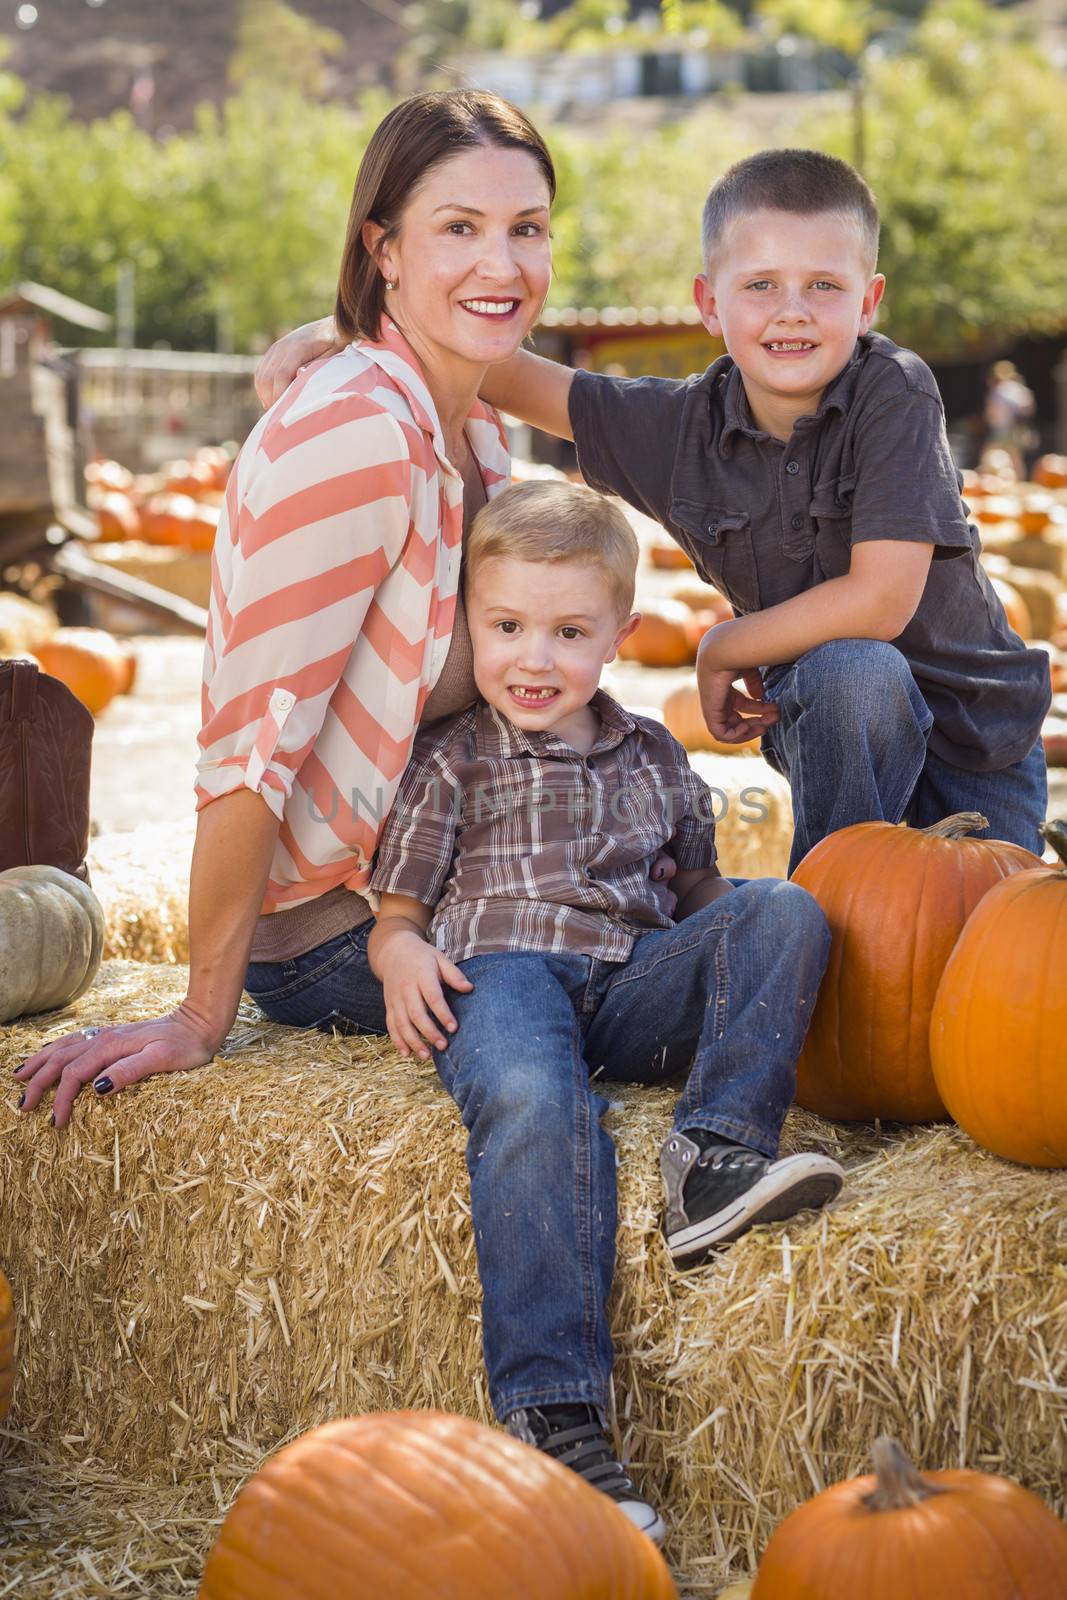 Portrait of Attractive Mother and Her Sons at Pumpkin Patch
 by Feverpitched